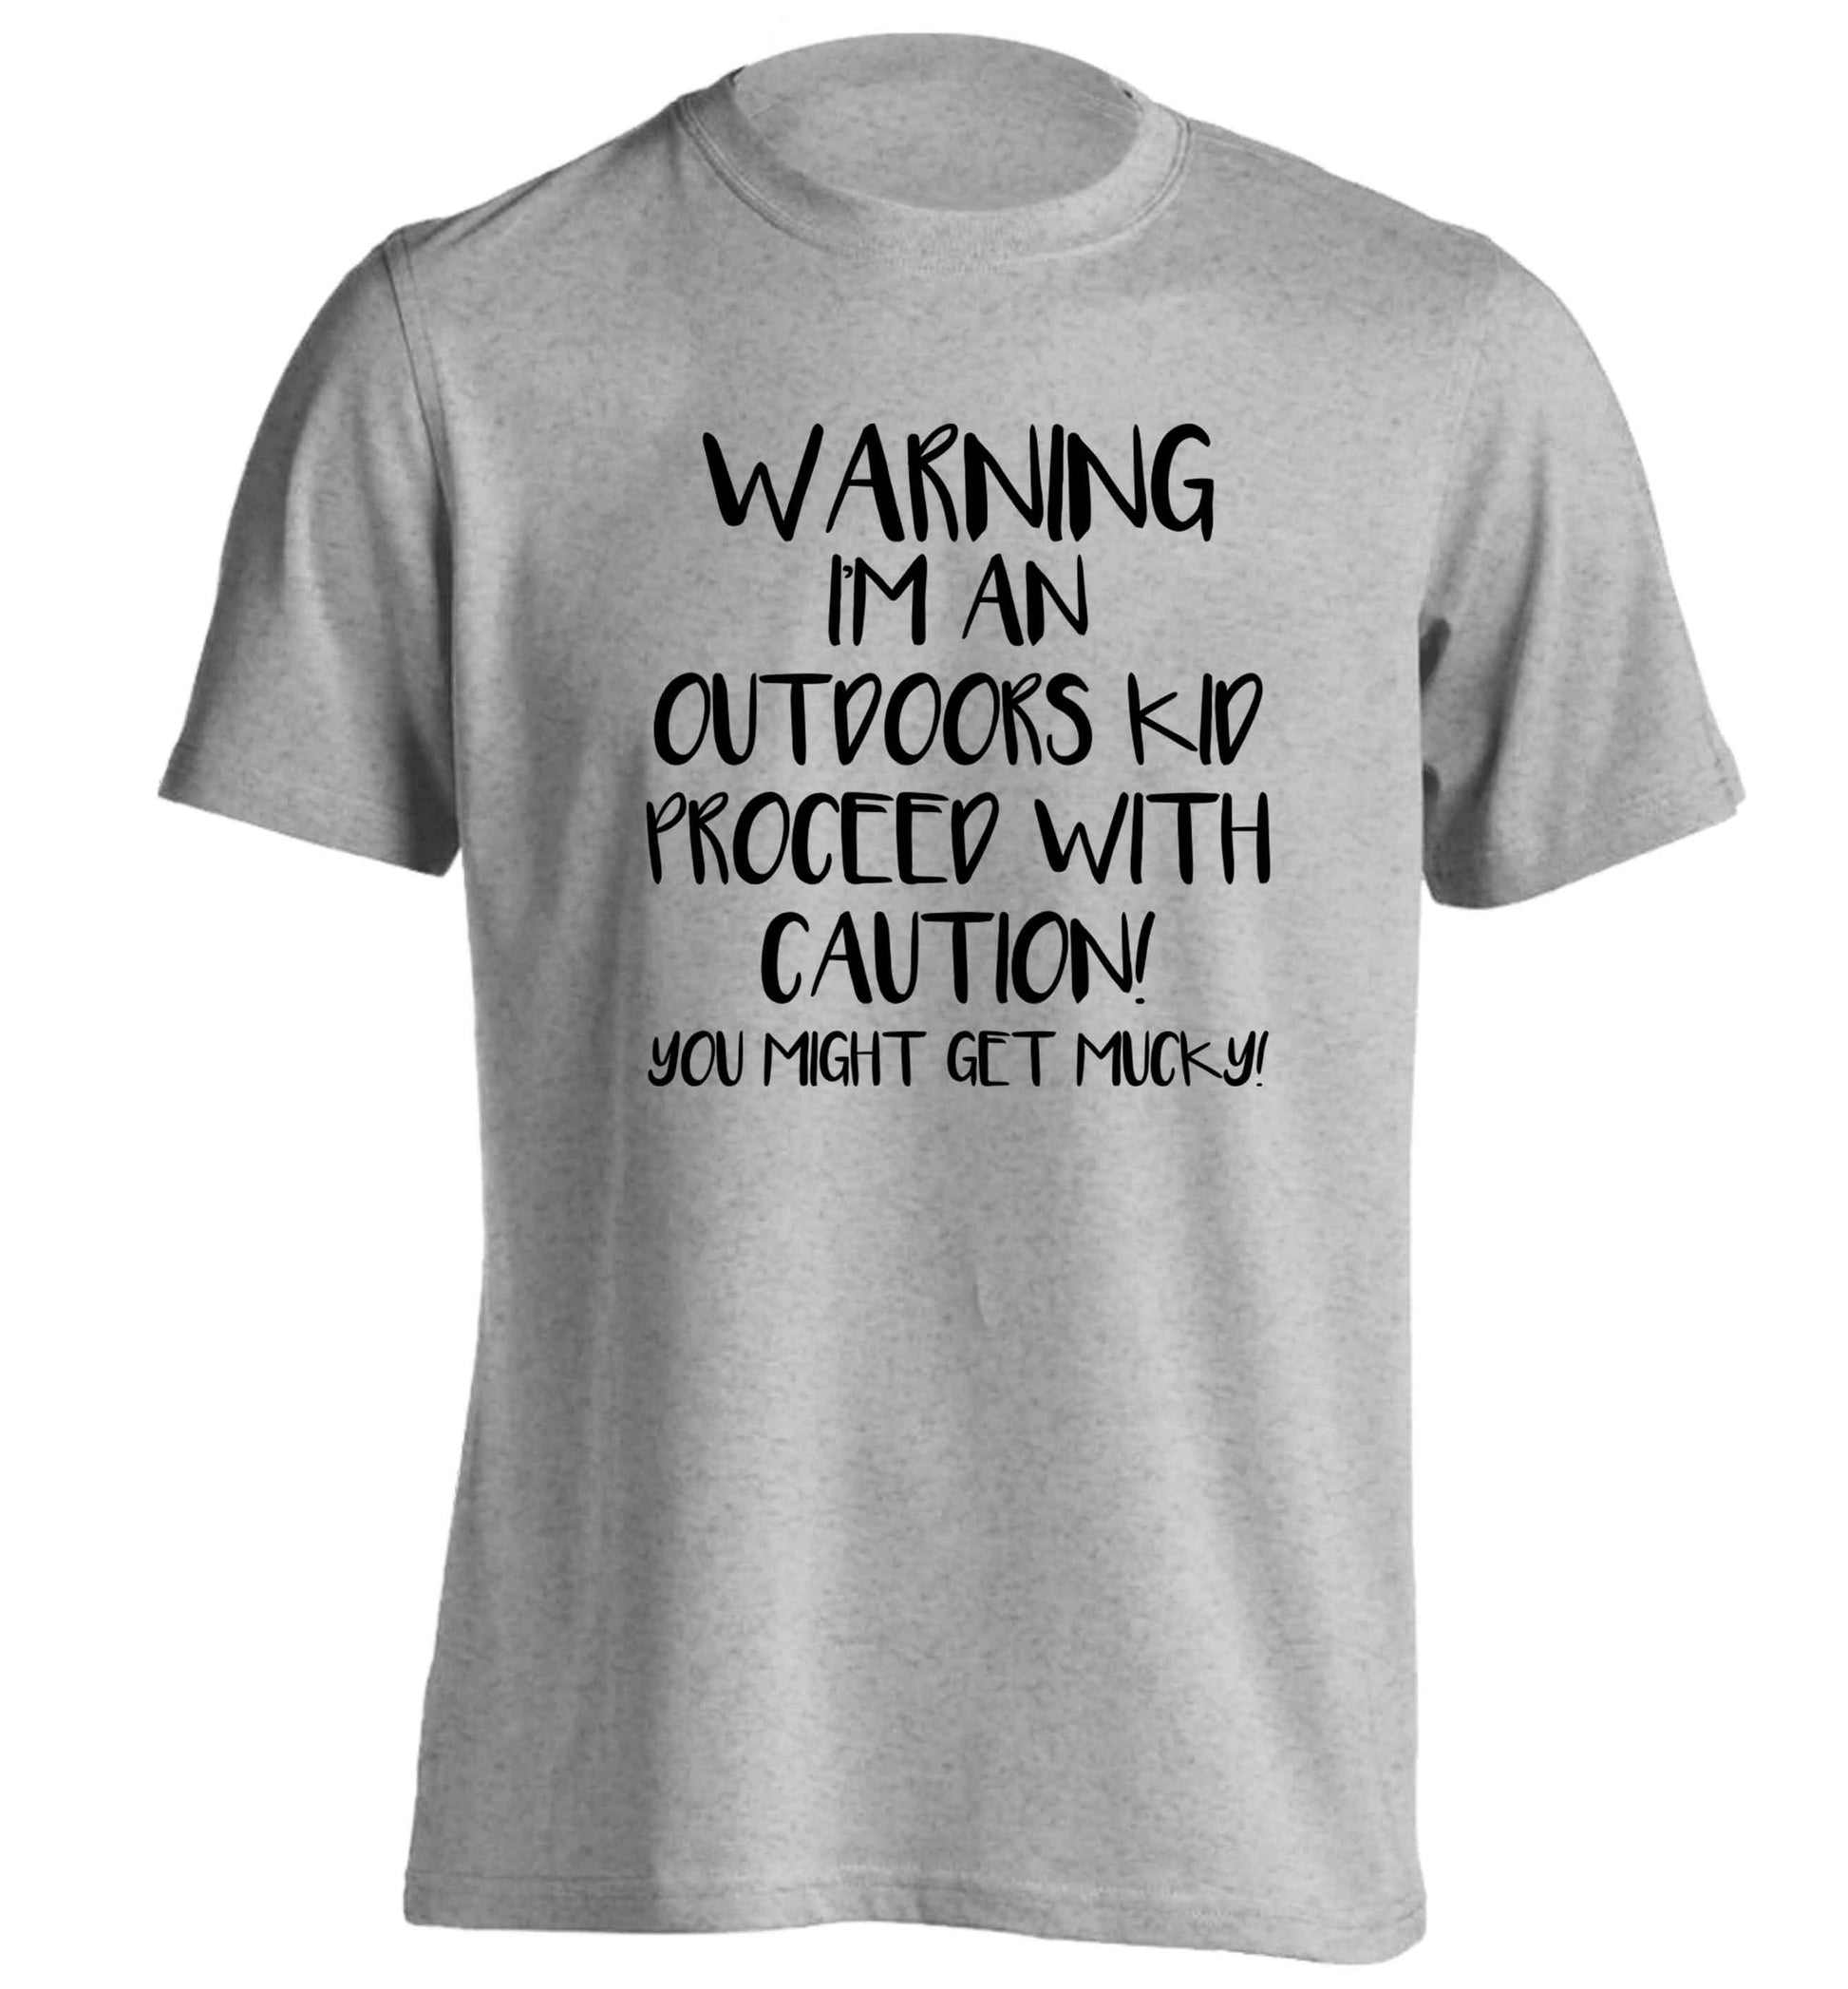 Warning I'm an outdoors kid! Proceed with caution you might get mucky adults unisex grey Tshirt 2XL